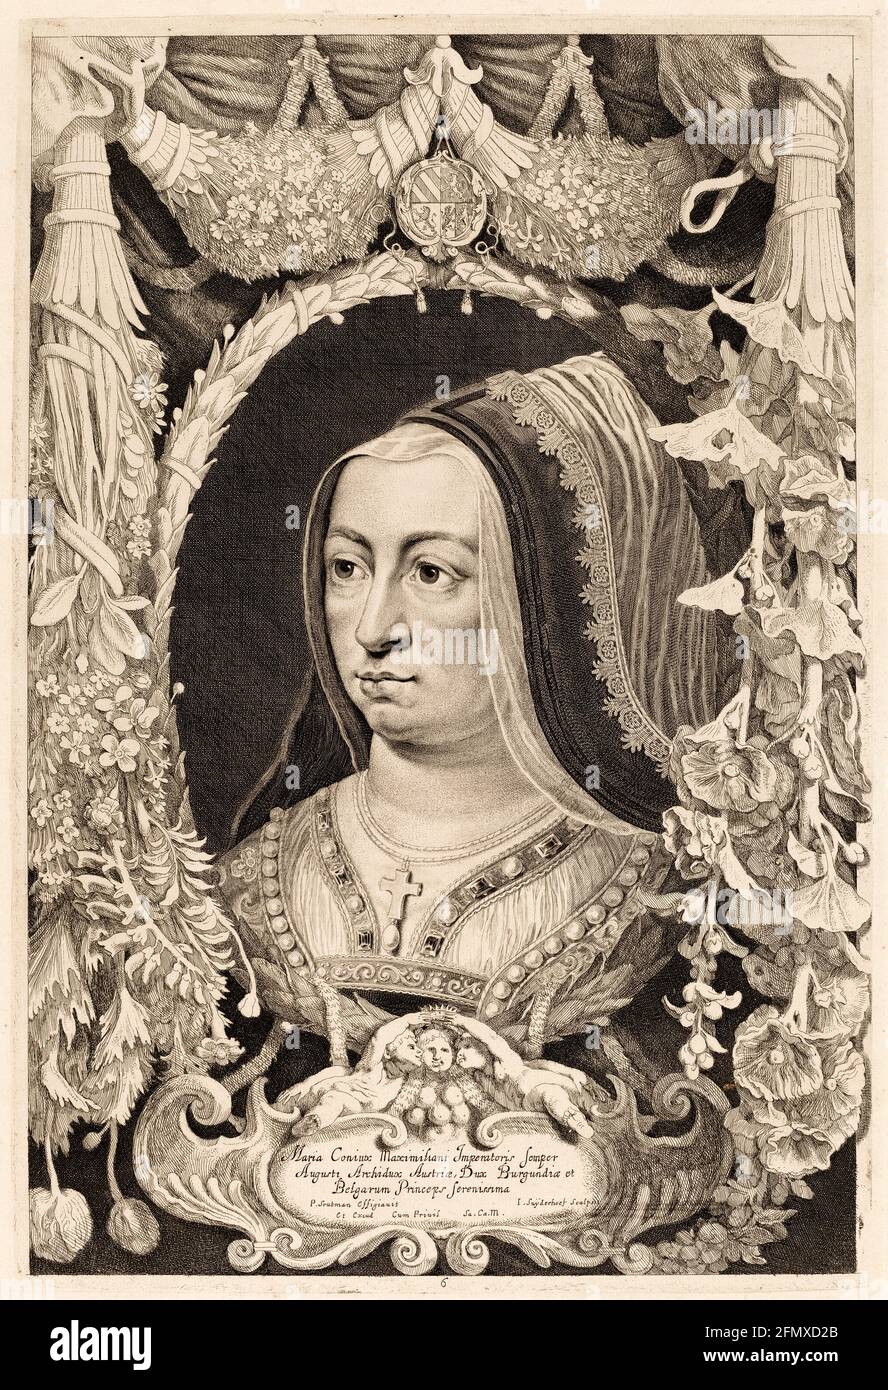 Mary (1457-1482), titular Duchess of Burgundy, 1477-1482, wife of Maximilian I (m. 1477) Holy Roman Emperor (1508-1519), portrait engraving by Jonas Suyderhoff after Pieter Claesz Soutman, before 1686 Stock Photo